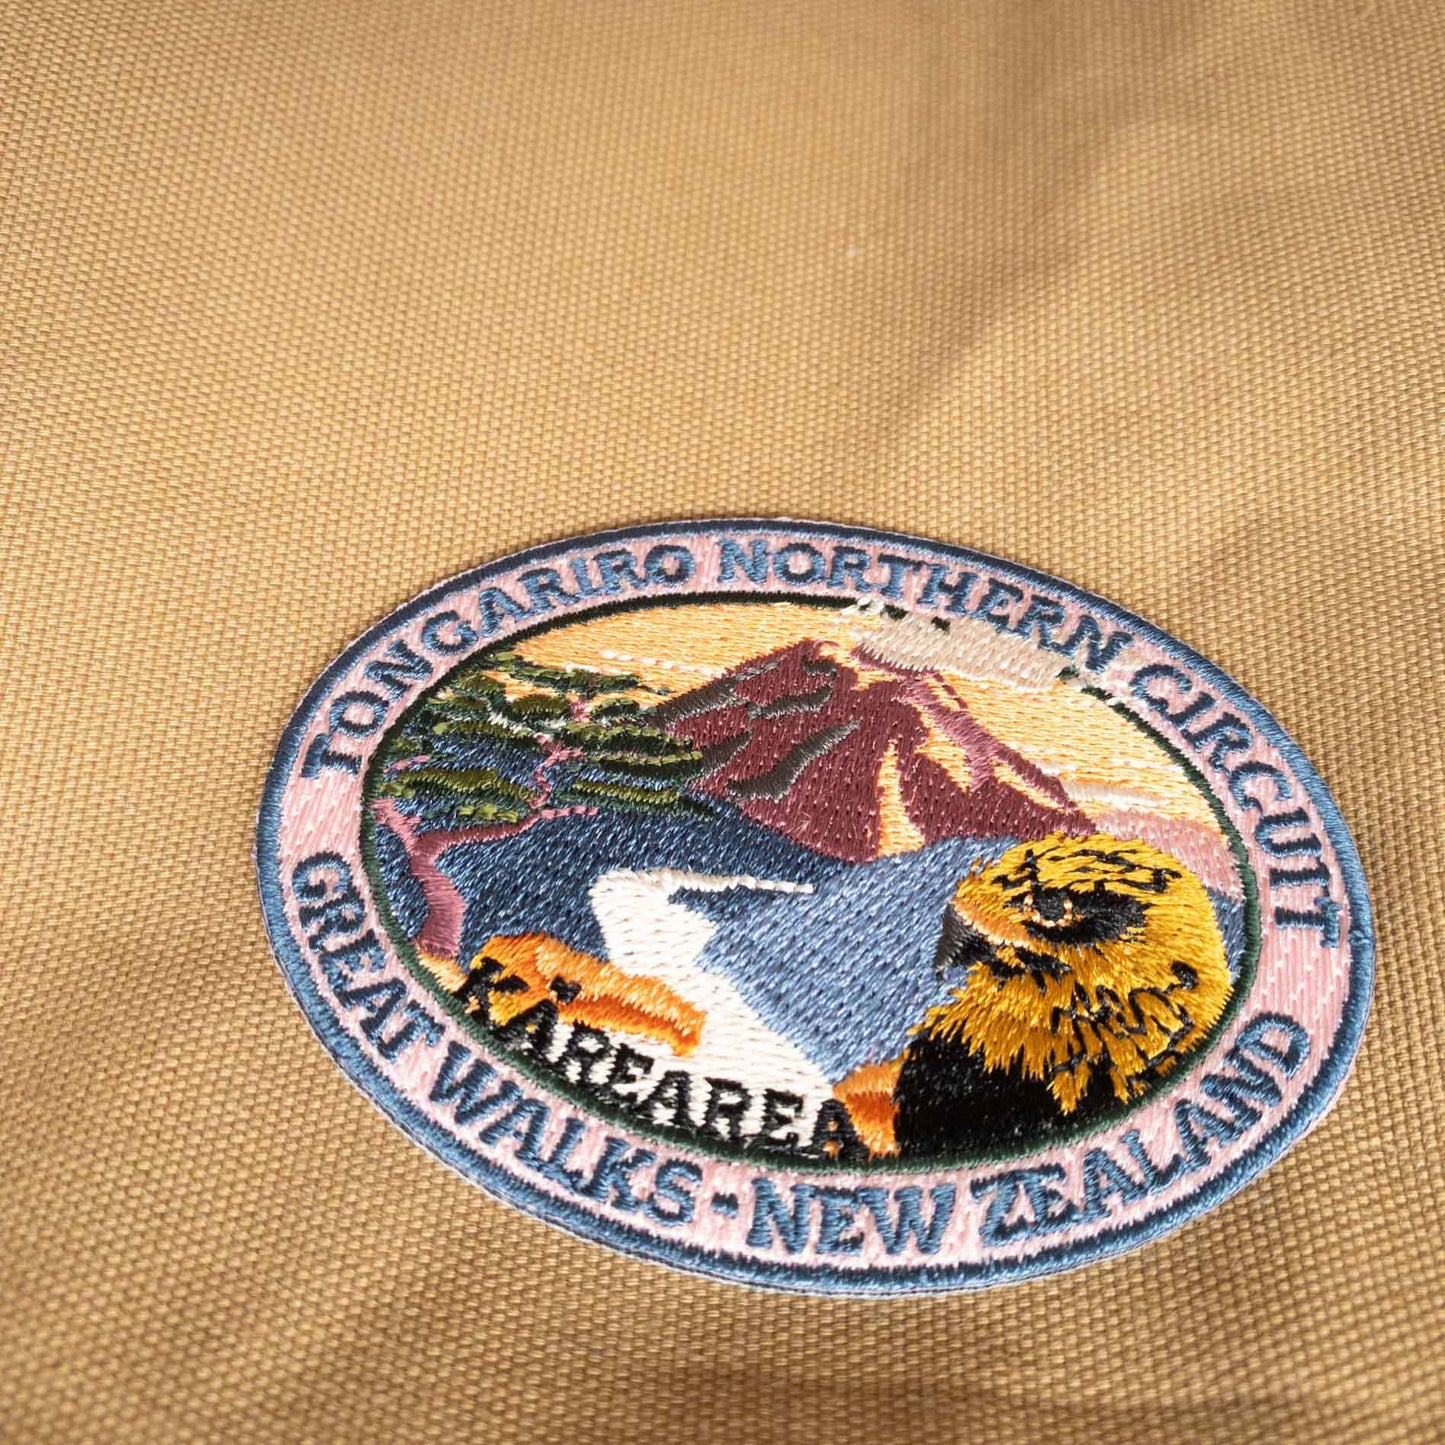 Oval, embroidered Tongaririo Northern Circuit Track patch, with a karearea/falcon, purple active volcano peak and orange sky, on brown kraft backing card.